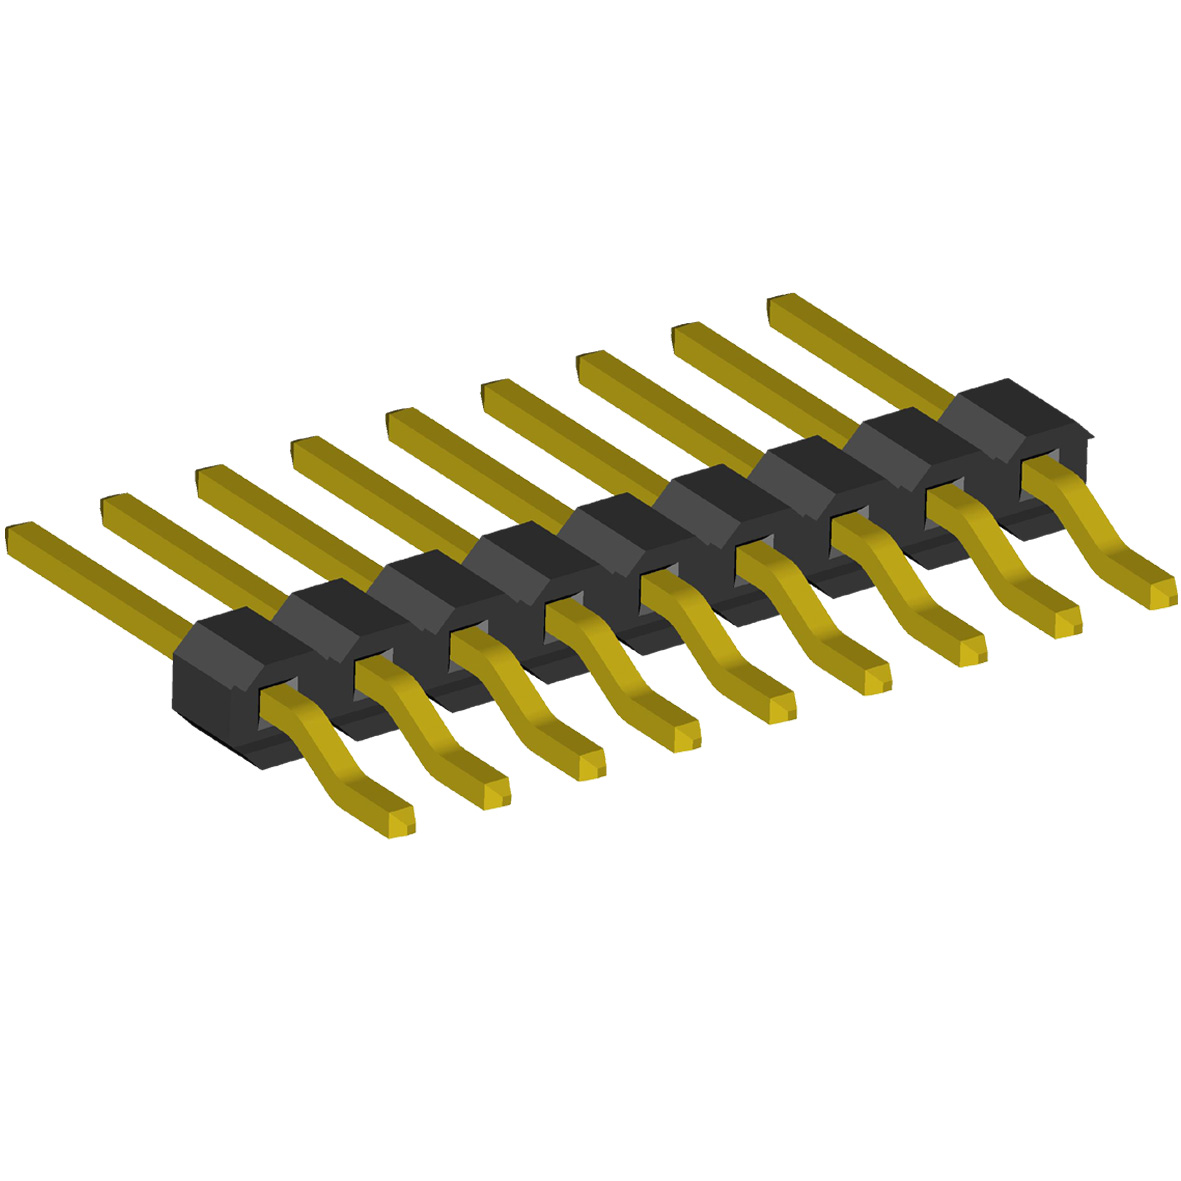 BL1225-11xxZ series, single row SMD angled pin headers, type 2, pitch 2,54 mm, Board-to-Board connectors, pin headers and sockets > pitch 2,54 mm